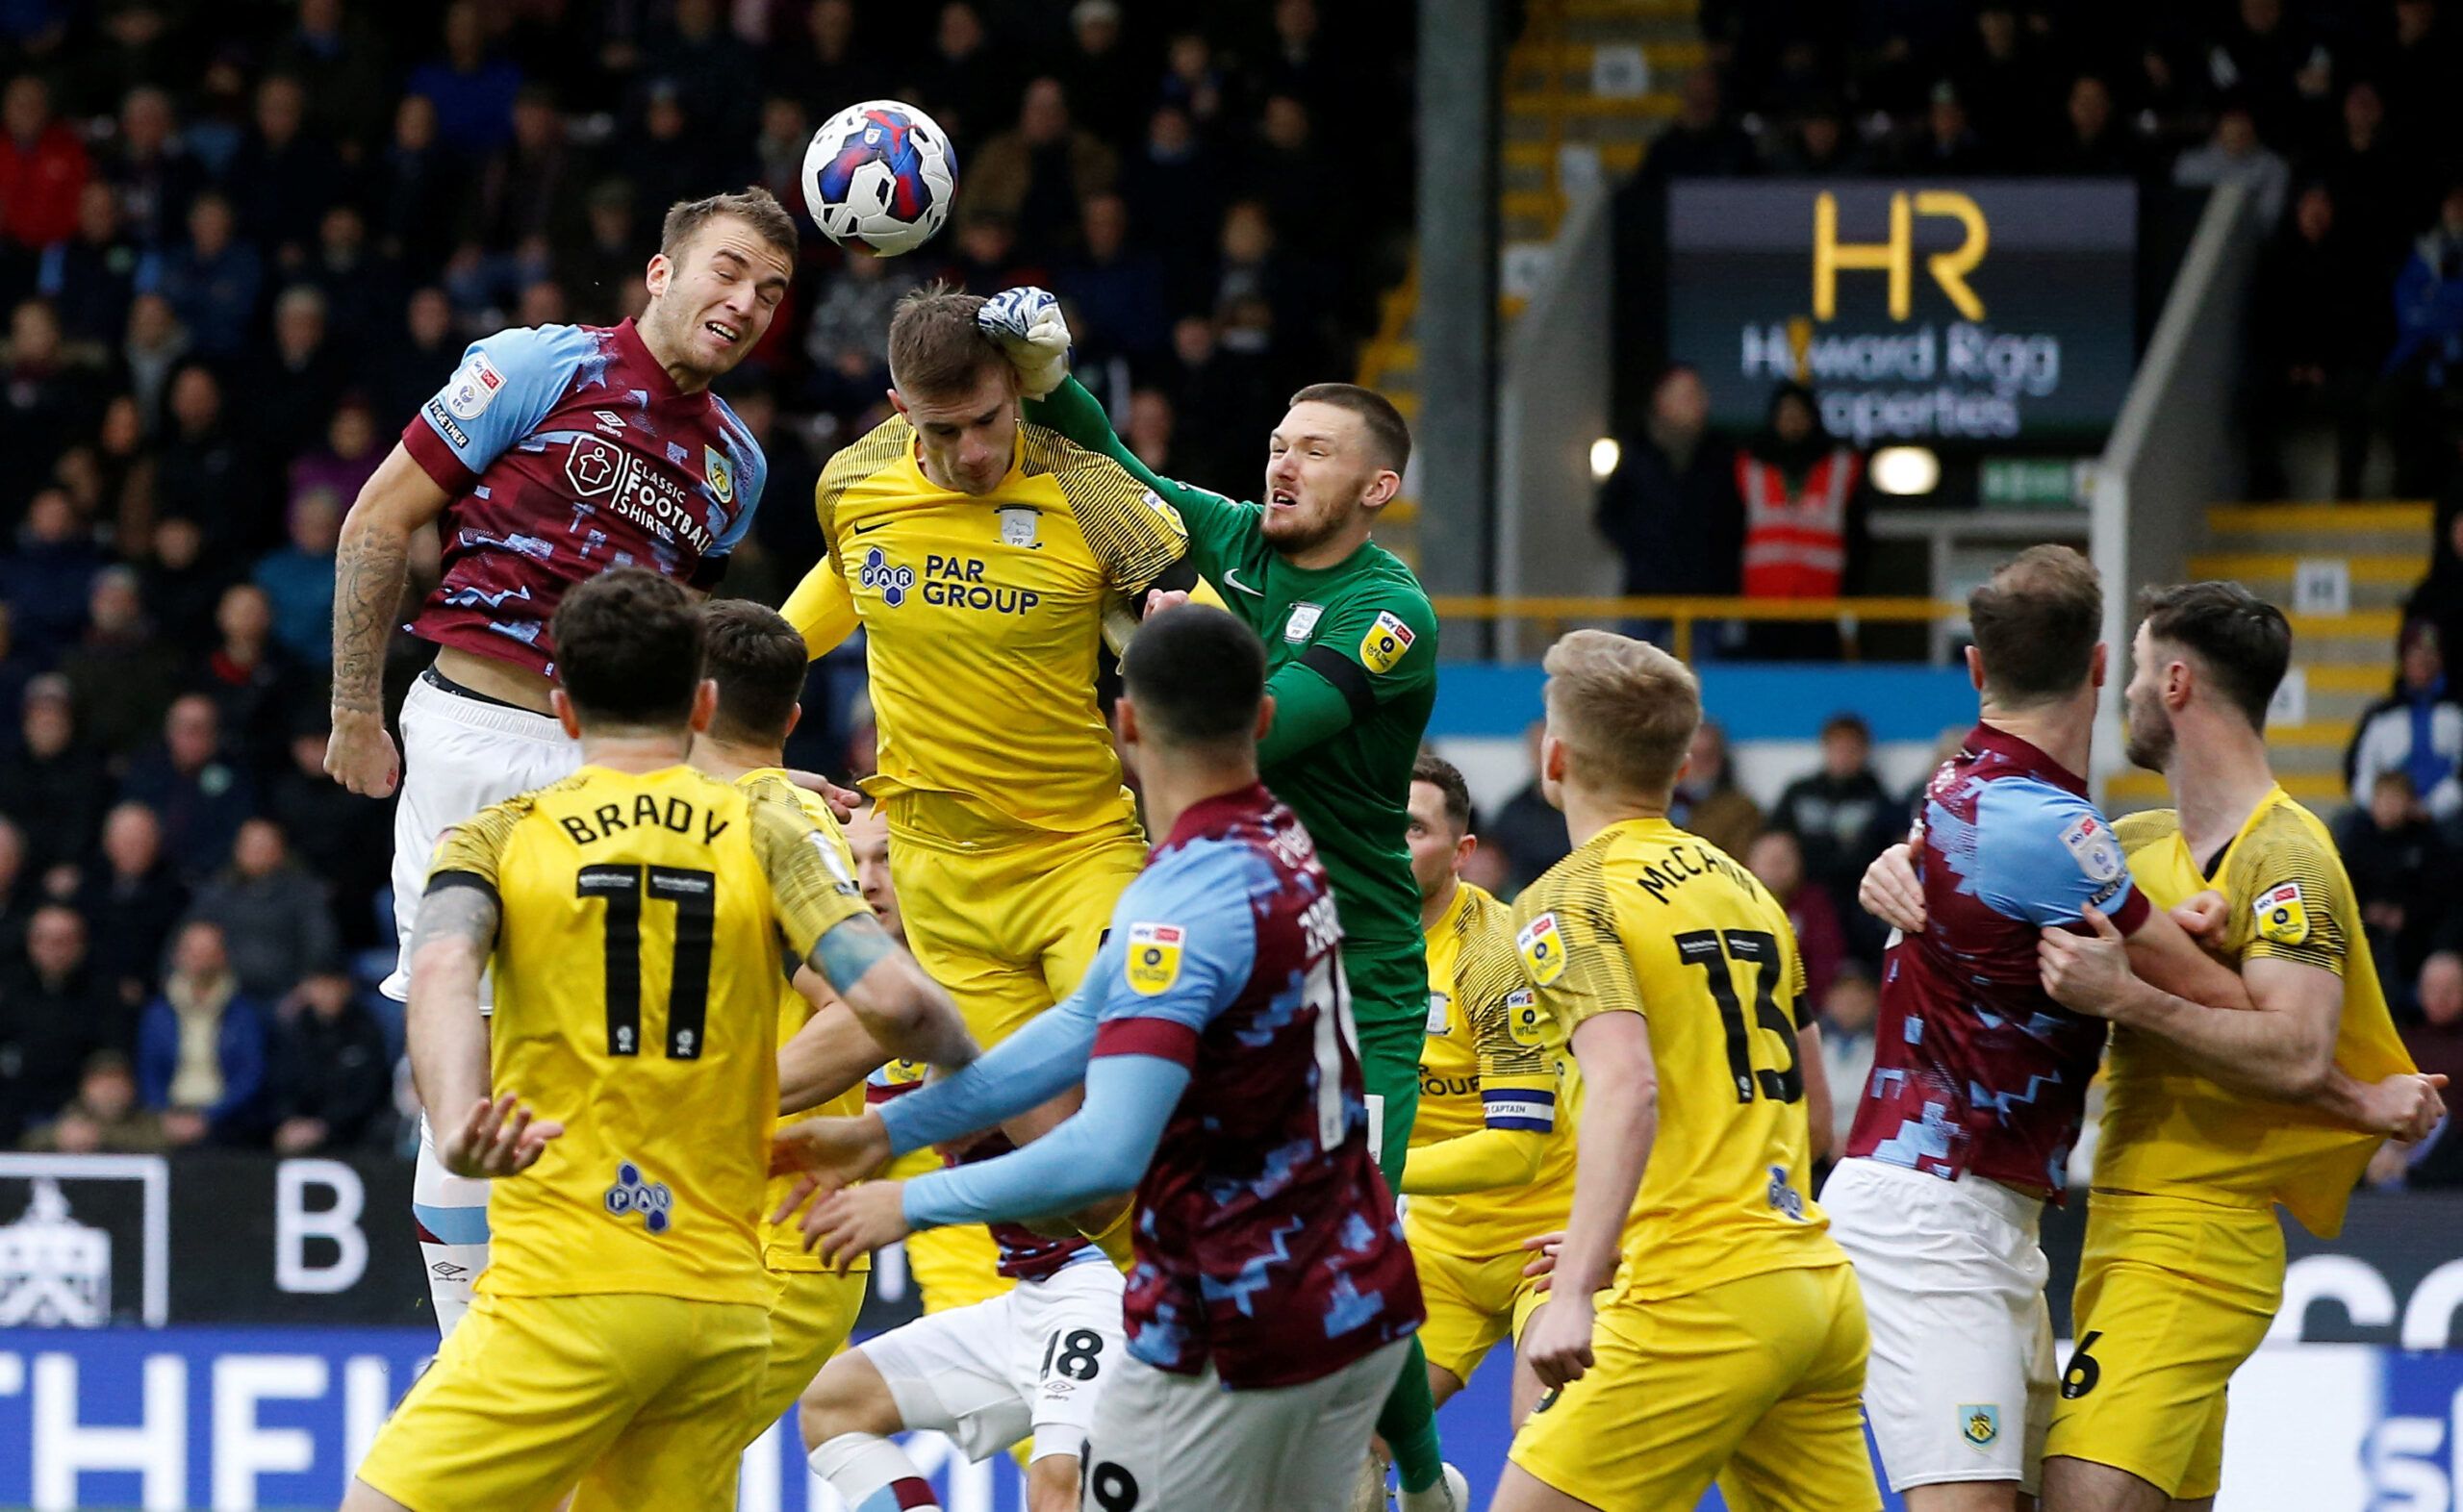 Soccer Football - Championship - Burnley v Preston North End - Turf Moor, Burnley, Britain - February 11, 2023 Burnley's Jordan Beyer heads at goal Action Images/Craig Brough  EDITORIAL USE ONLY. No use with unauthorized audio, video, data, fixture lists, club/league logos or 